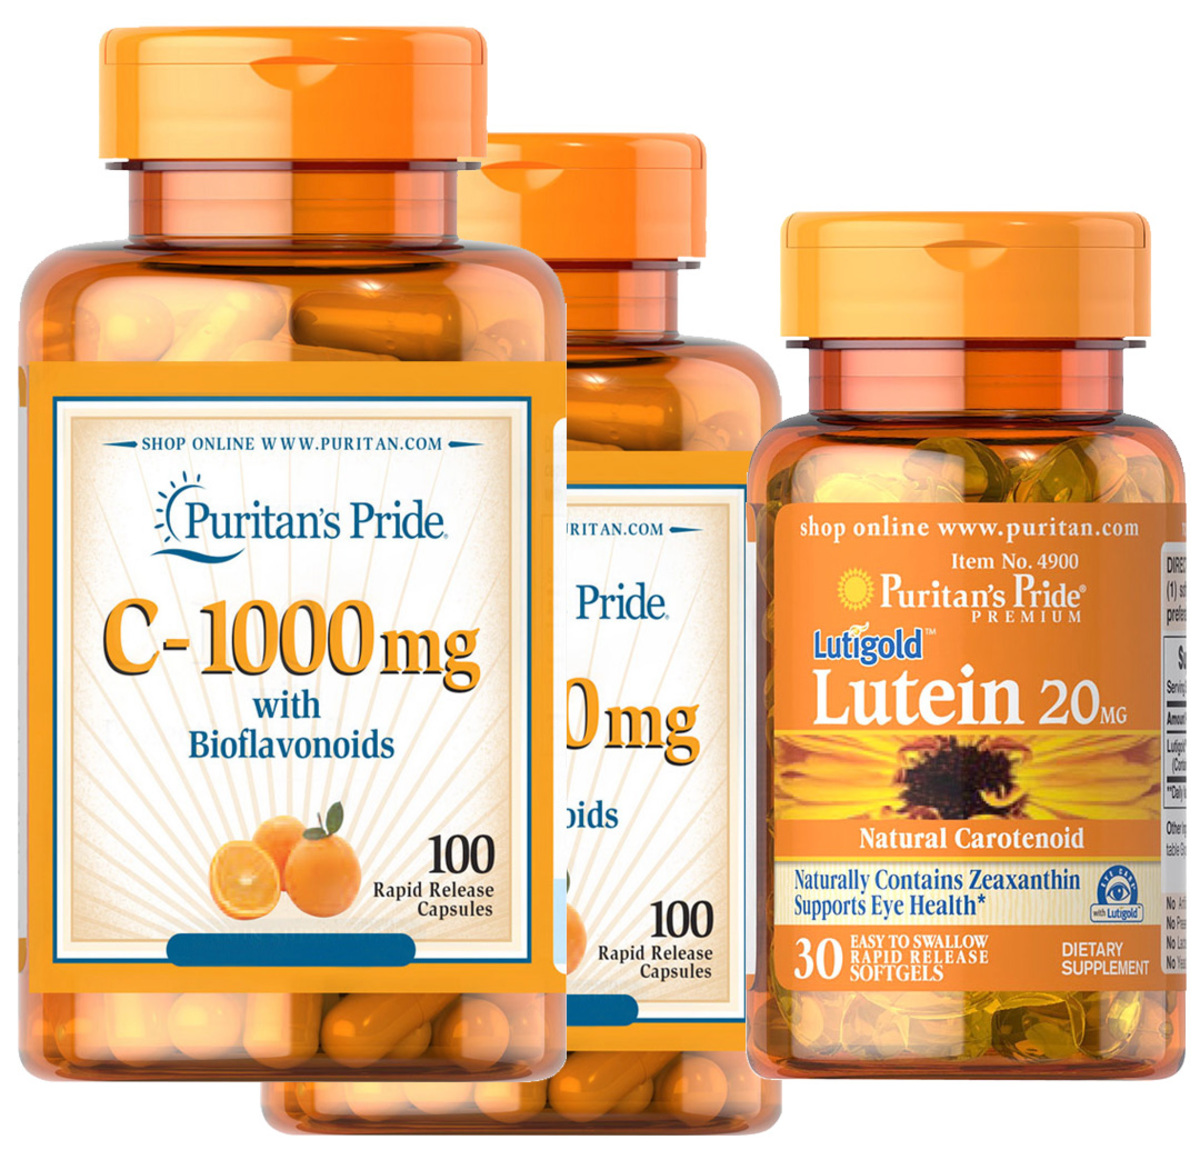 Puritan S Pride 2x Vitamin C 1000 Mg With Bioflavonoids 100s Best Before 9 22 Hktvmall The Largest Hk Shopping Platform